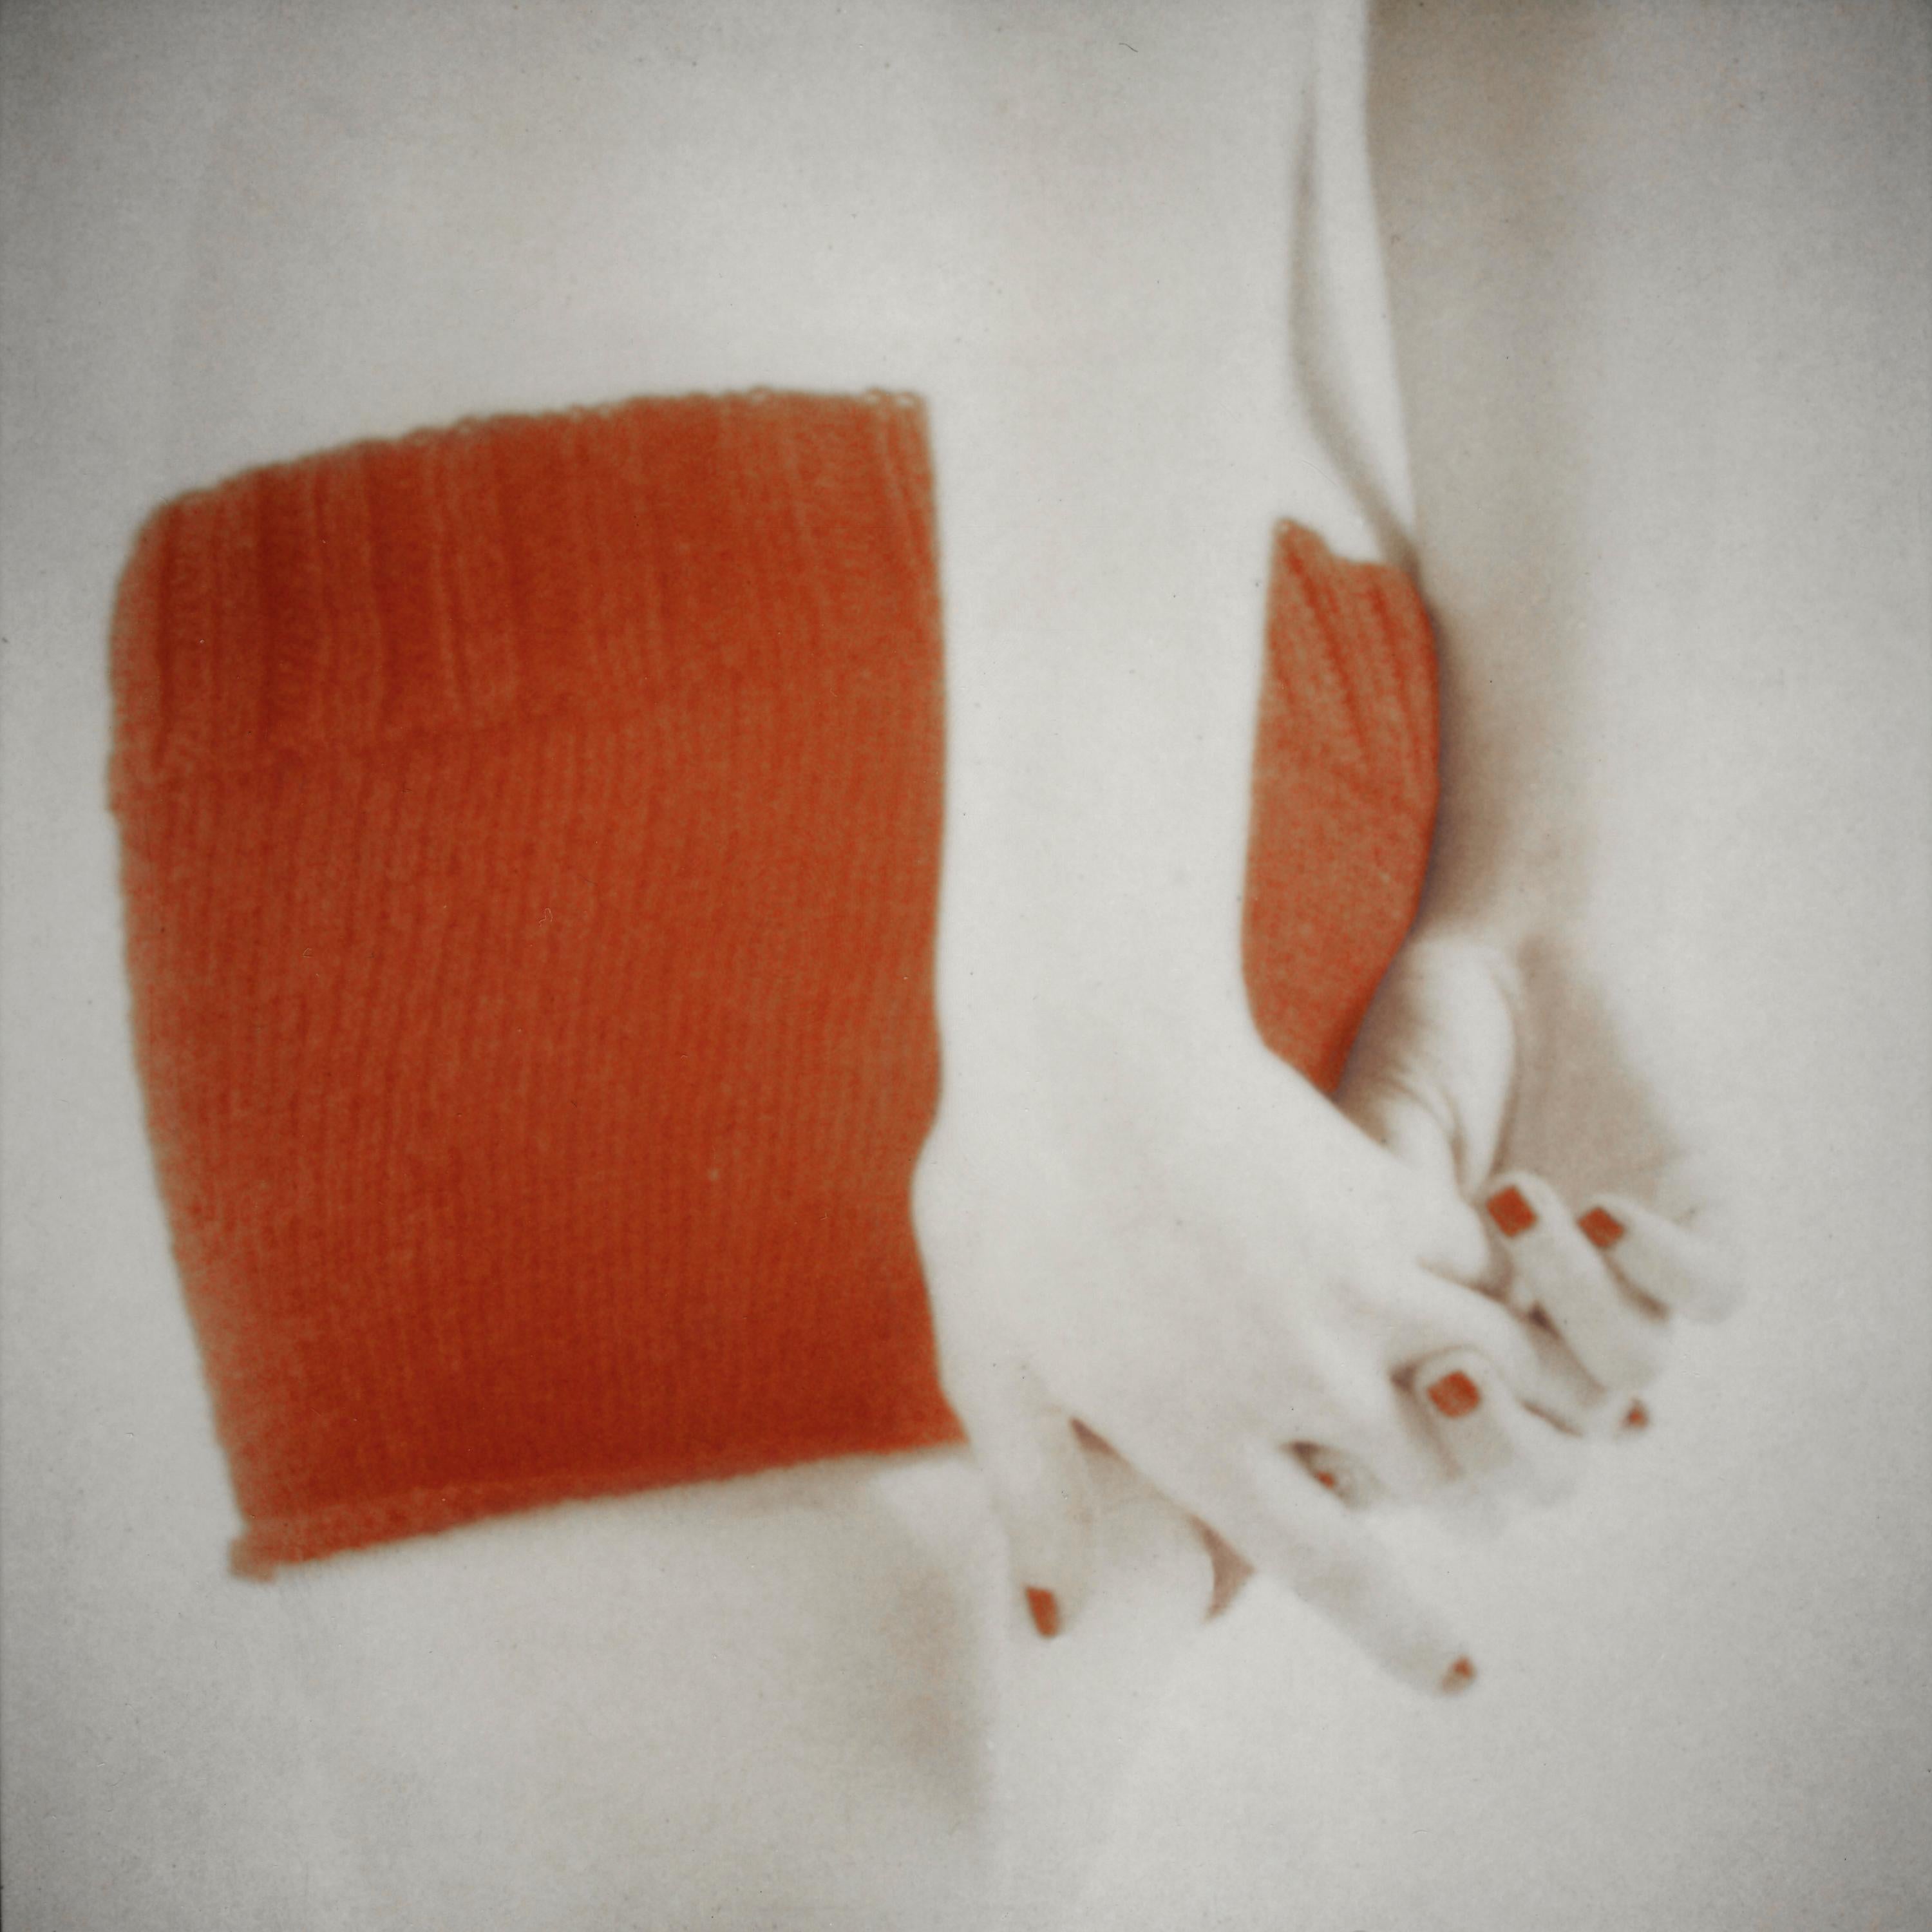 Orange Knit with Clasped Hands, figurative and feminine photography, Mira Loew